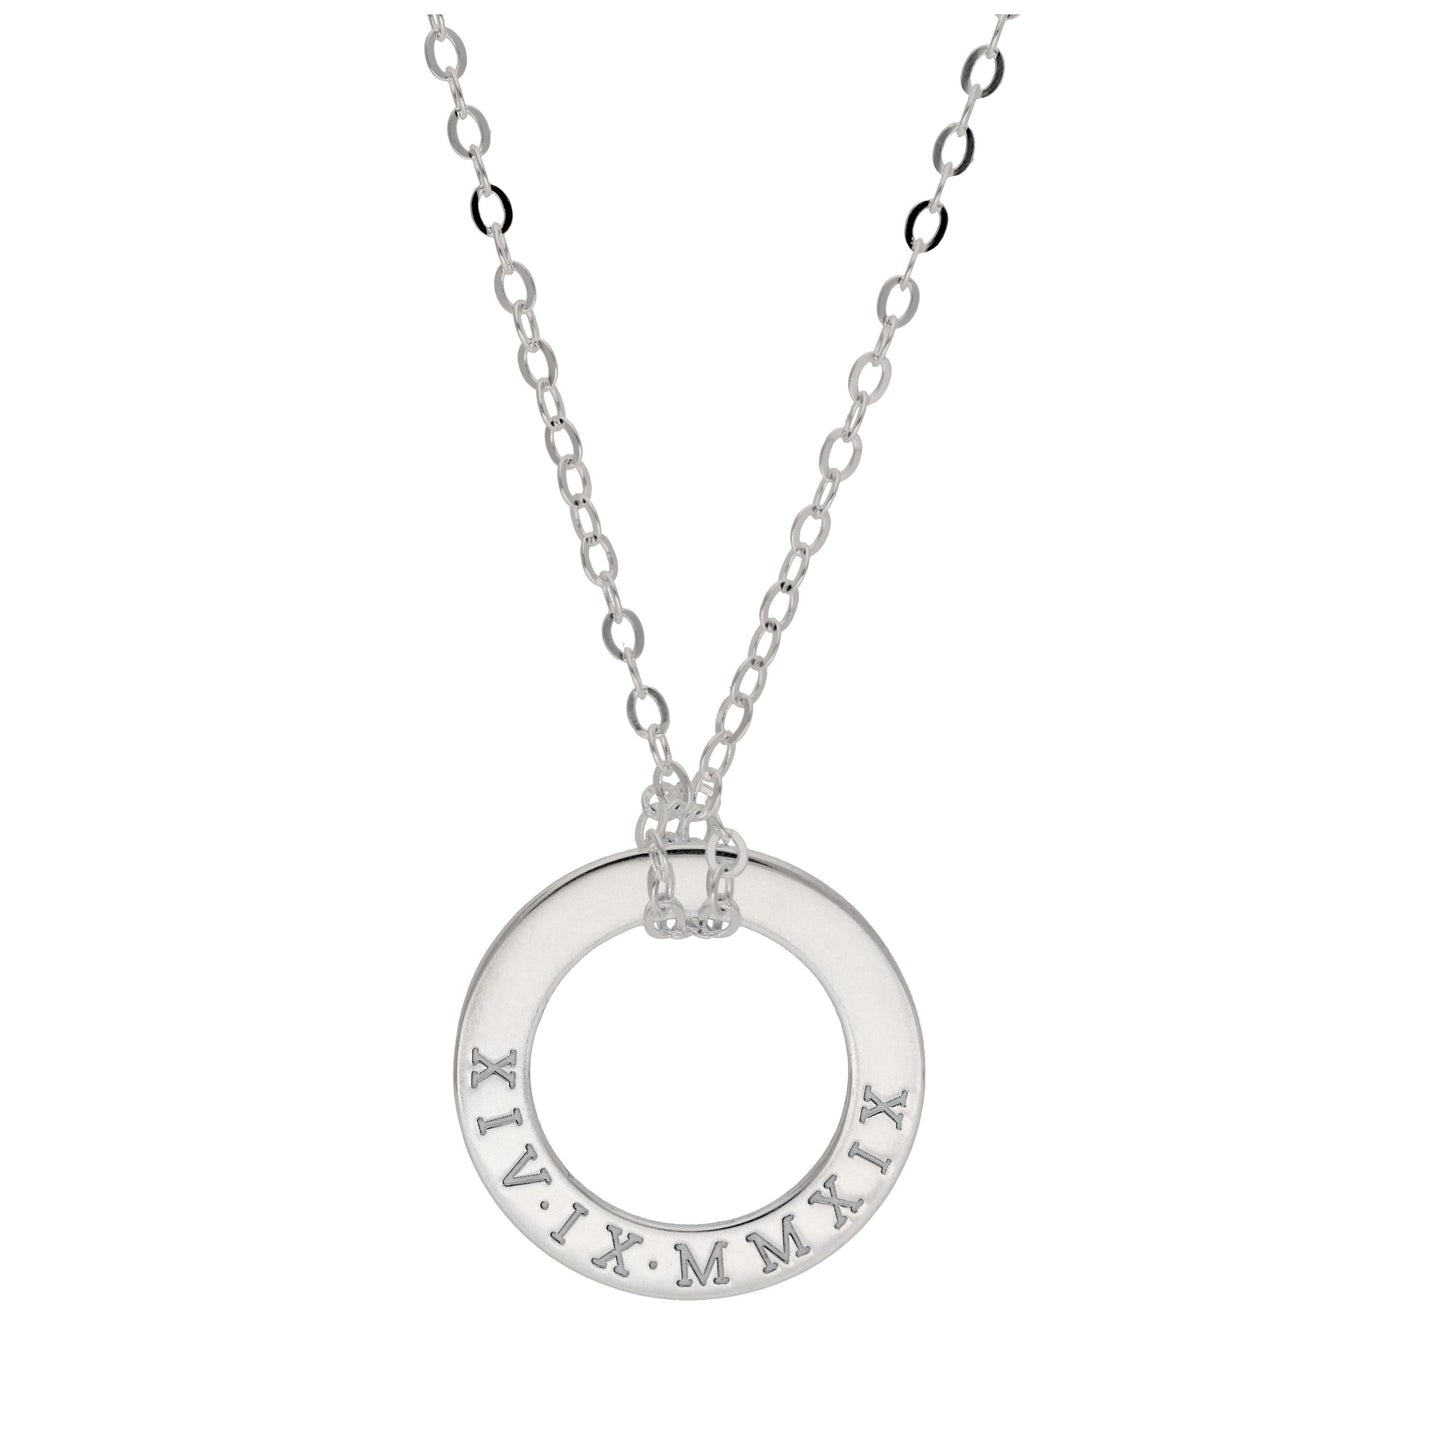 Bespoke Sterling Silver Roman Numeral Circle Necklace 16 - 28 Inches